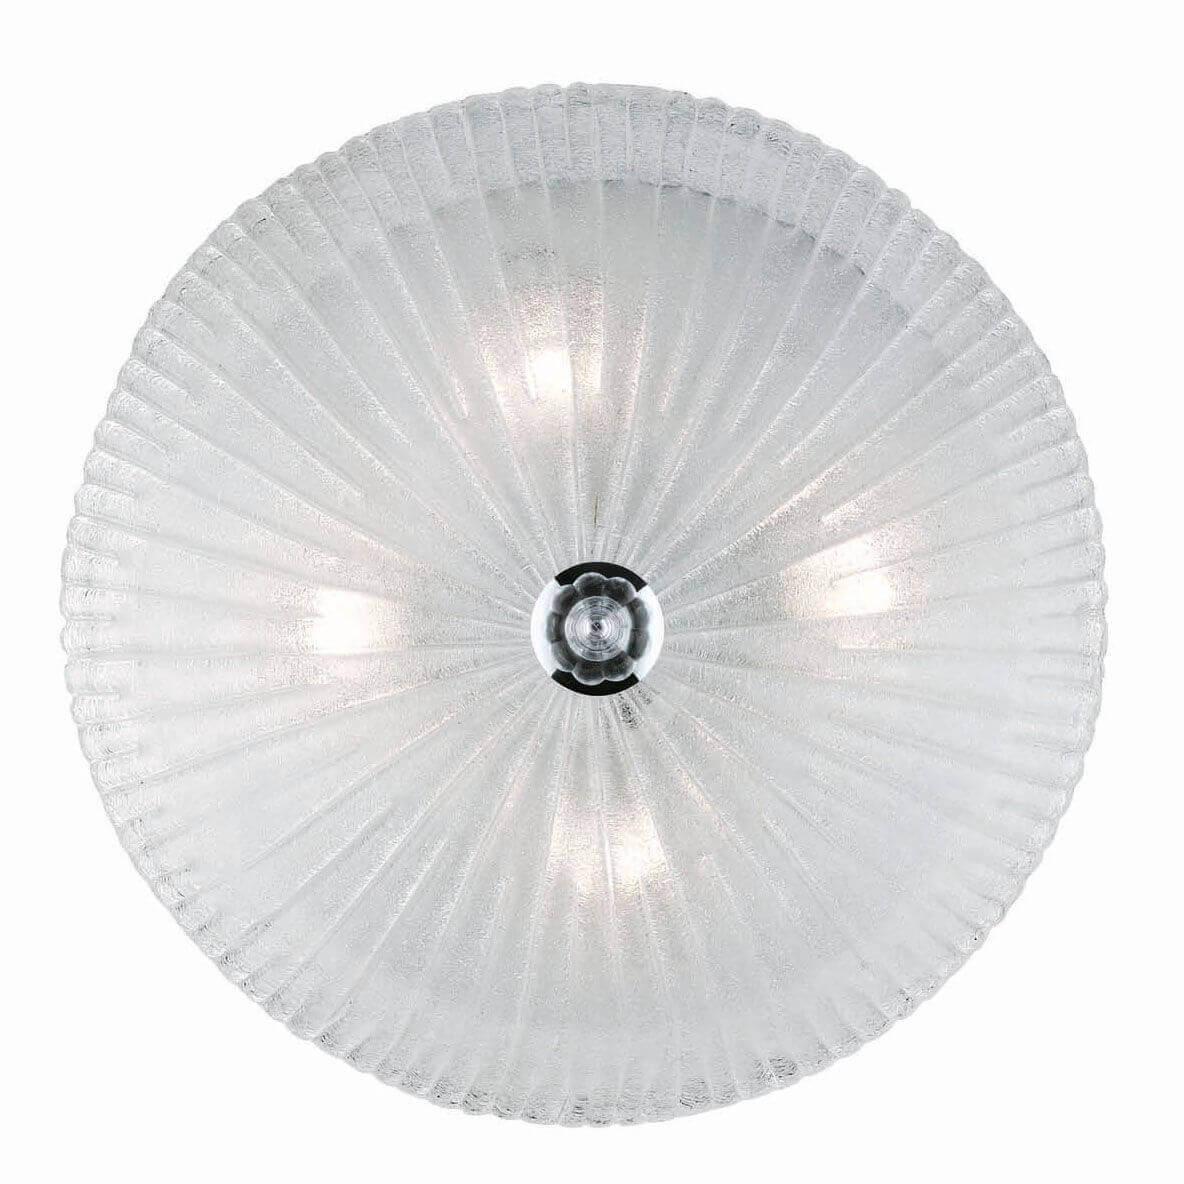   Ideal Lux Shell PL4 Trasparente 008615